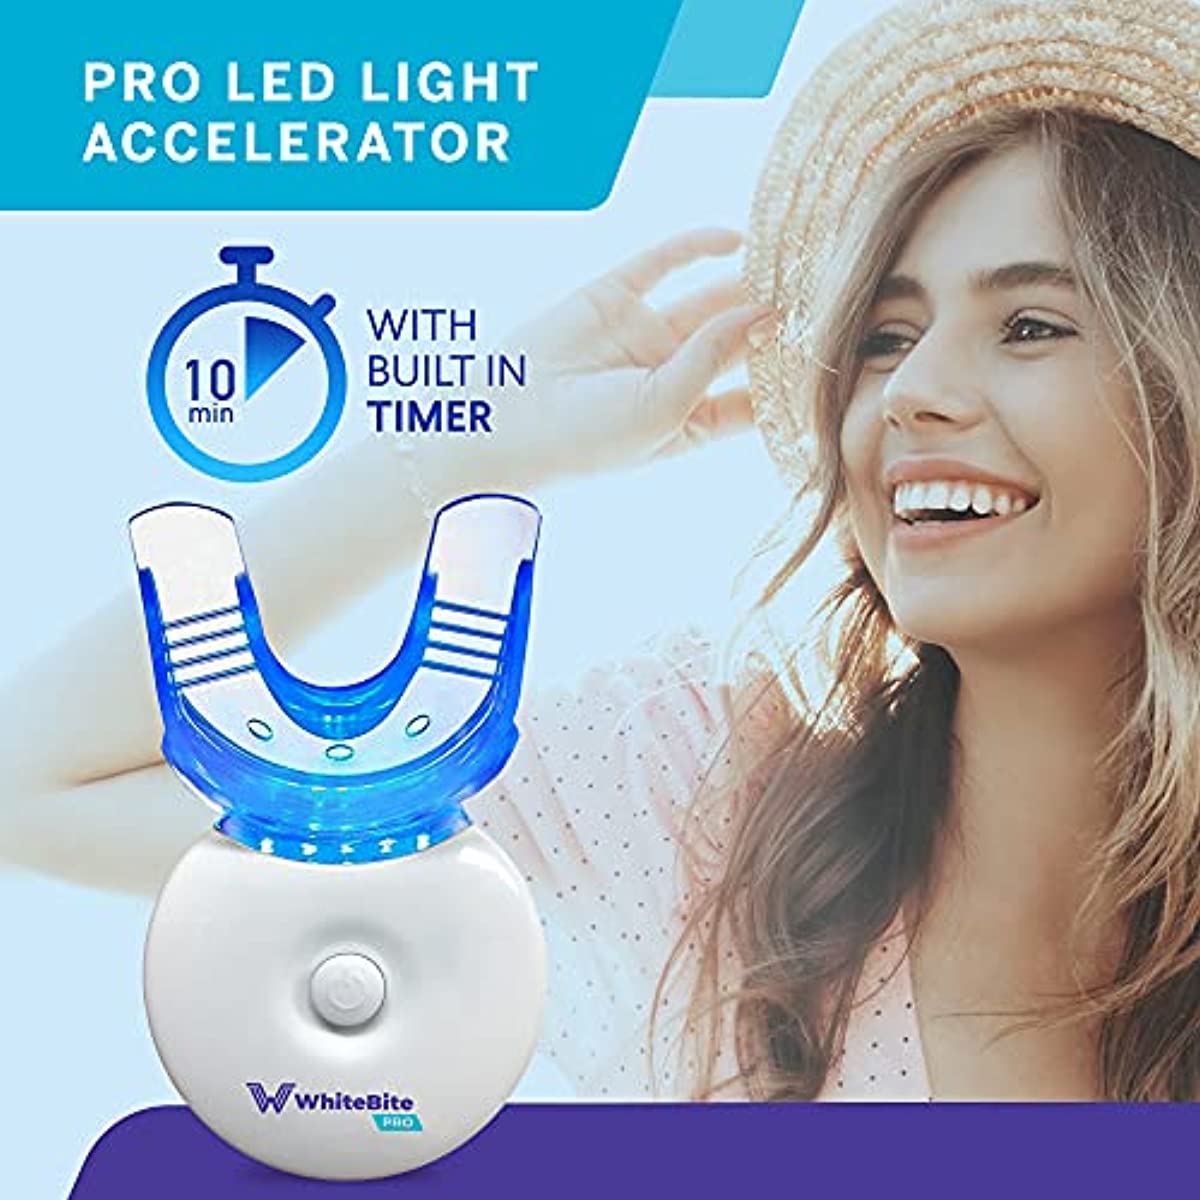 Whitebite Pro Teeth Whitening Kit with LED Light for Sensitive Teeth, Tooth Whitening System with 35{6759d95606d5803cfadd0253beece9061060cabe9c677495a71be97ab37f03a7} Carbamide Peroxide, (4)3ml Gel Syringes, (2)Remineralization Gel, and Mouth Tray, 7 Piece Set